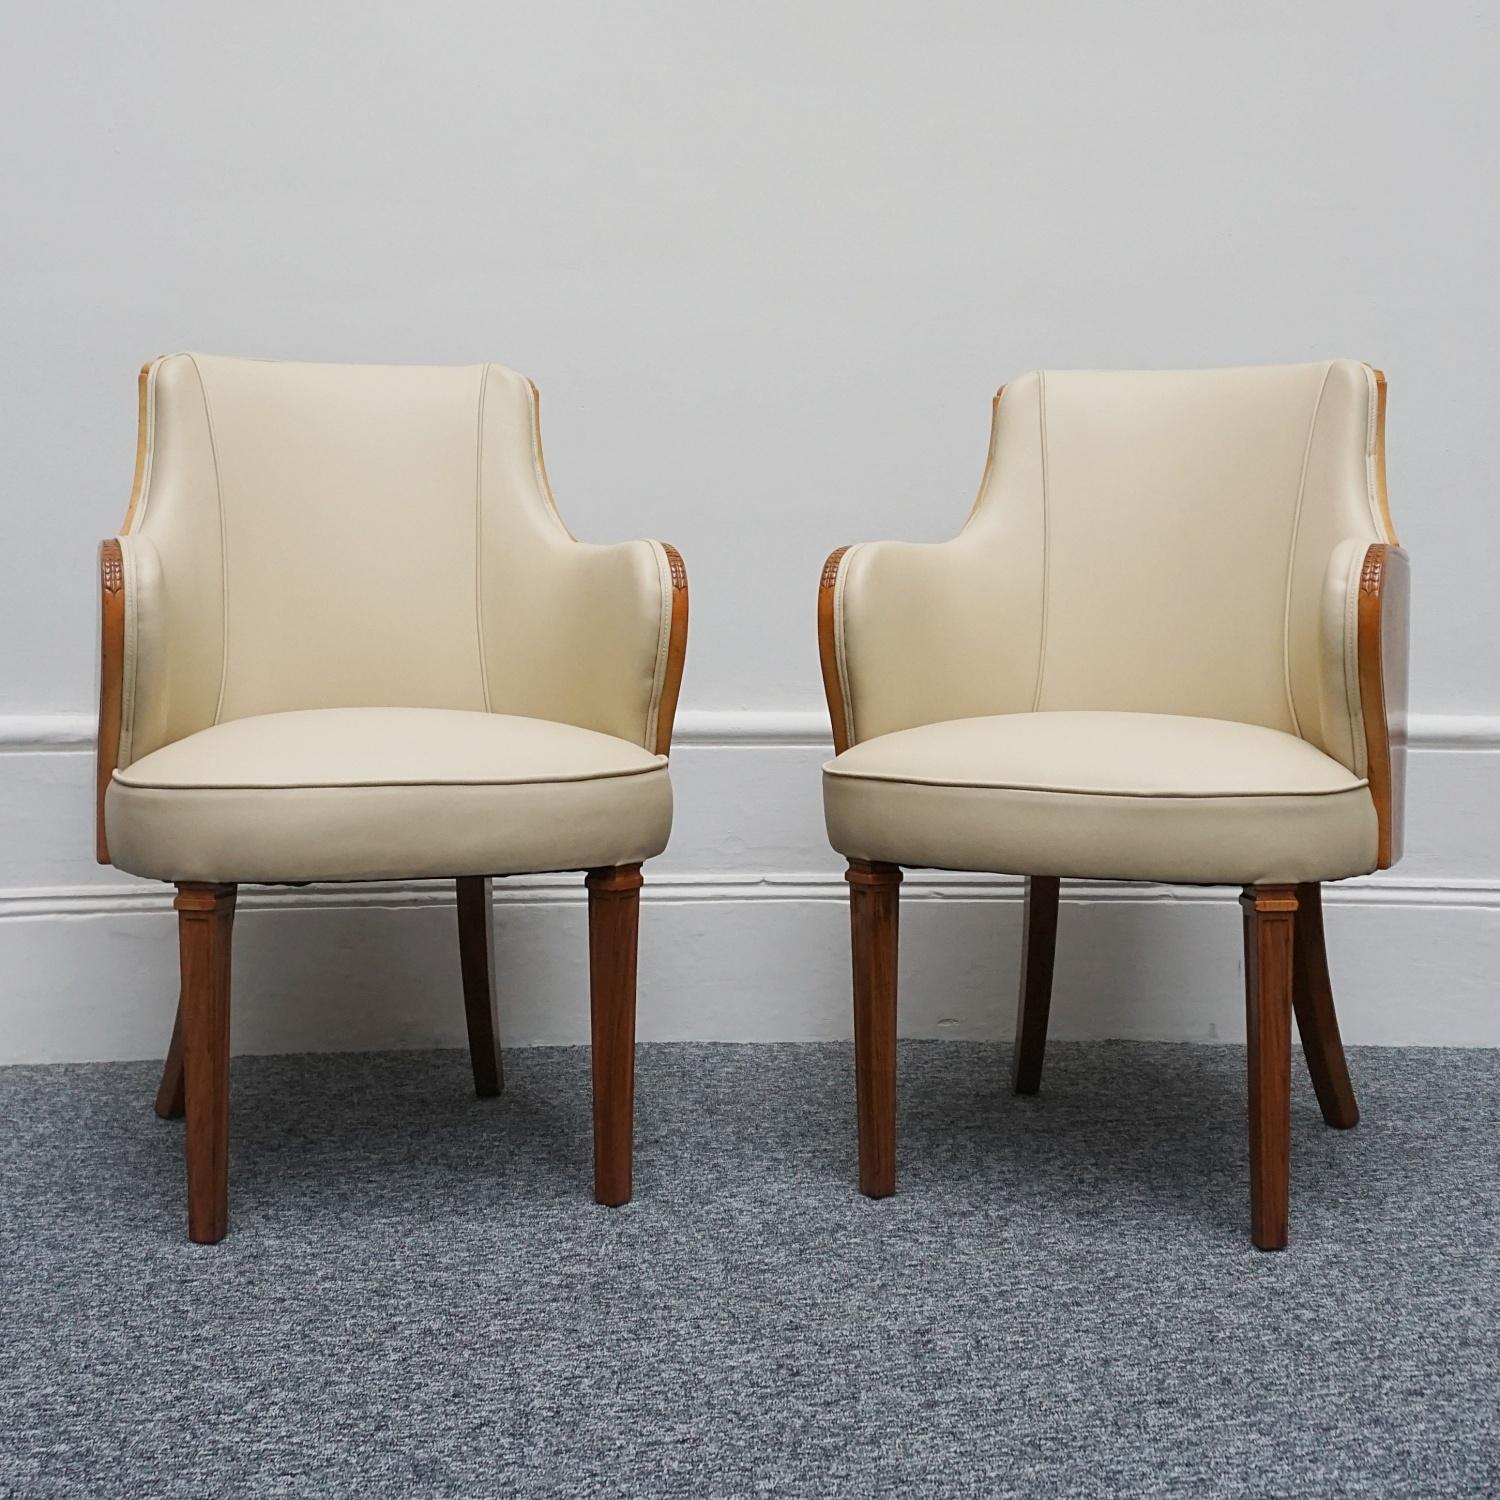 English Pair of Art Deco Armchairs by Maurice Adams Walnut and Leather Circa 1930